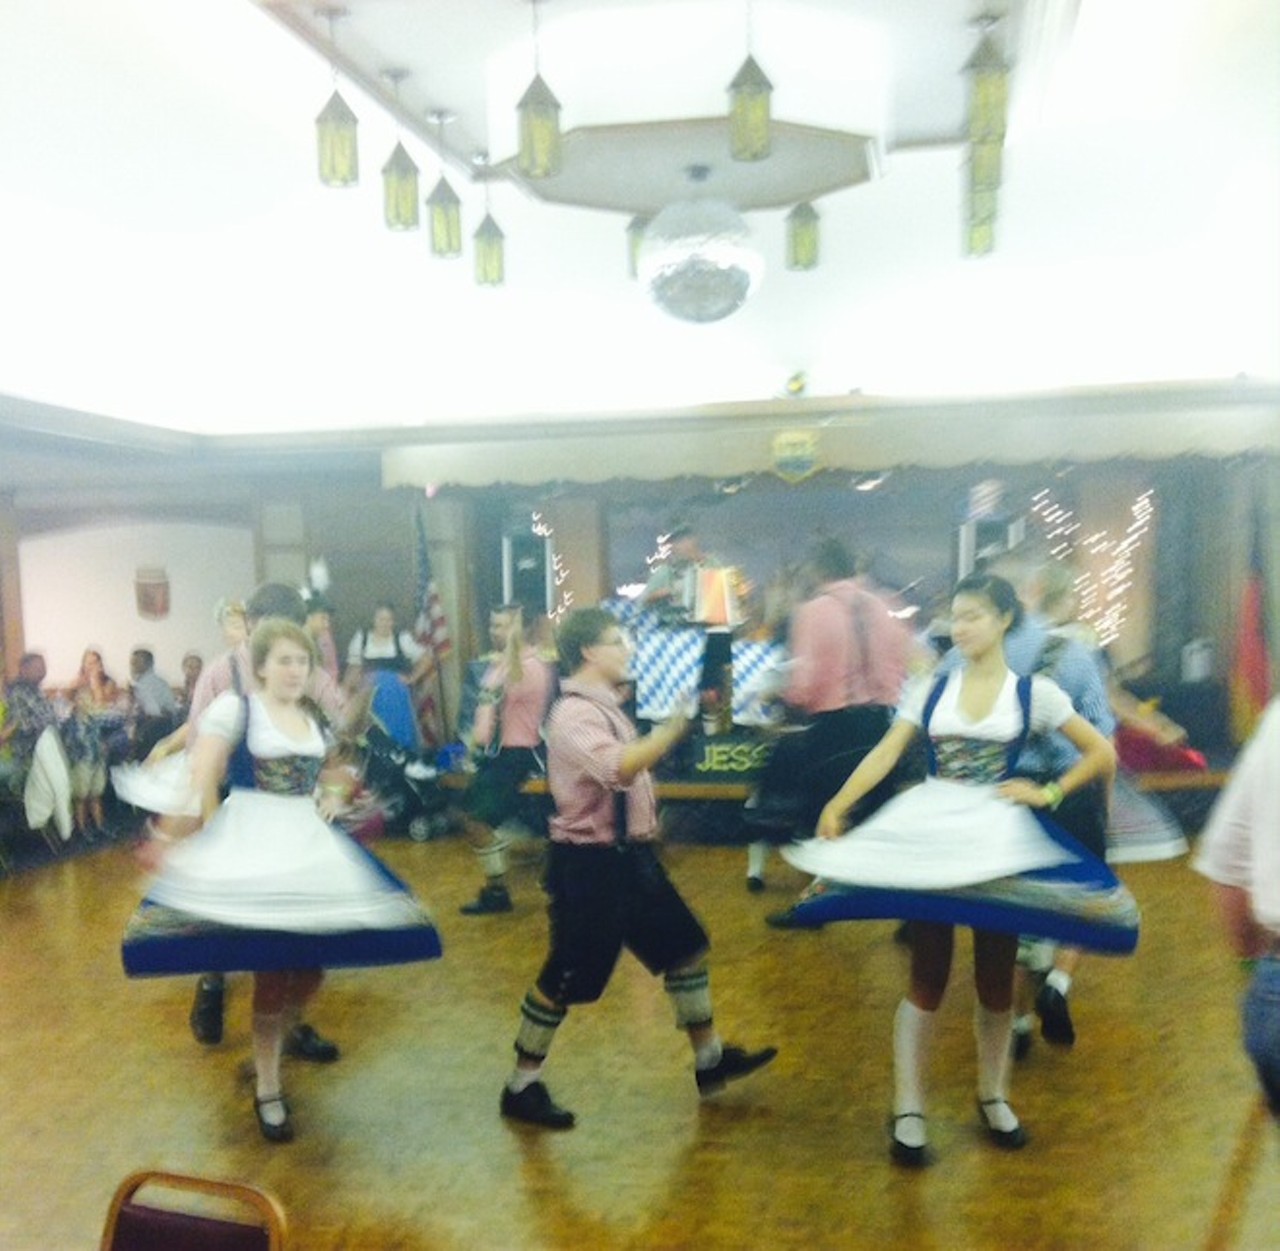 Dancing at the German American Society of Central Florida's Oktoberfest